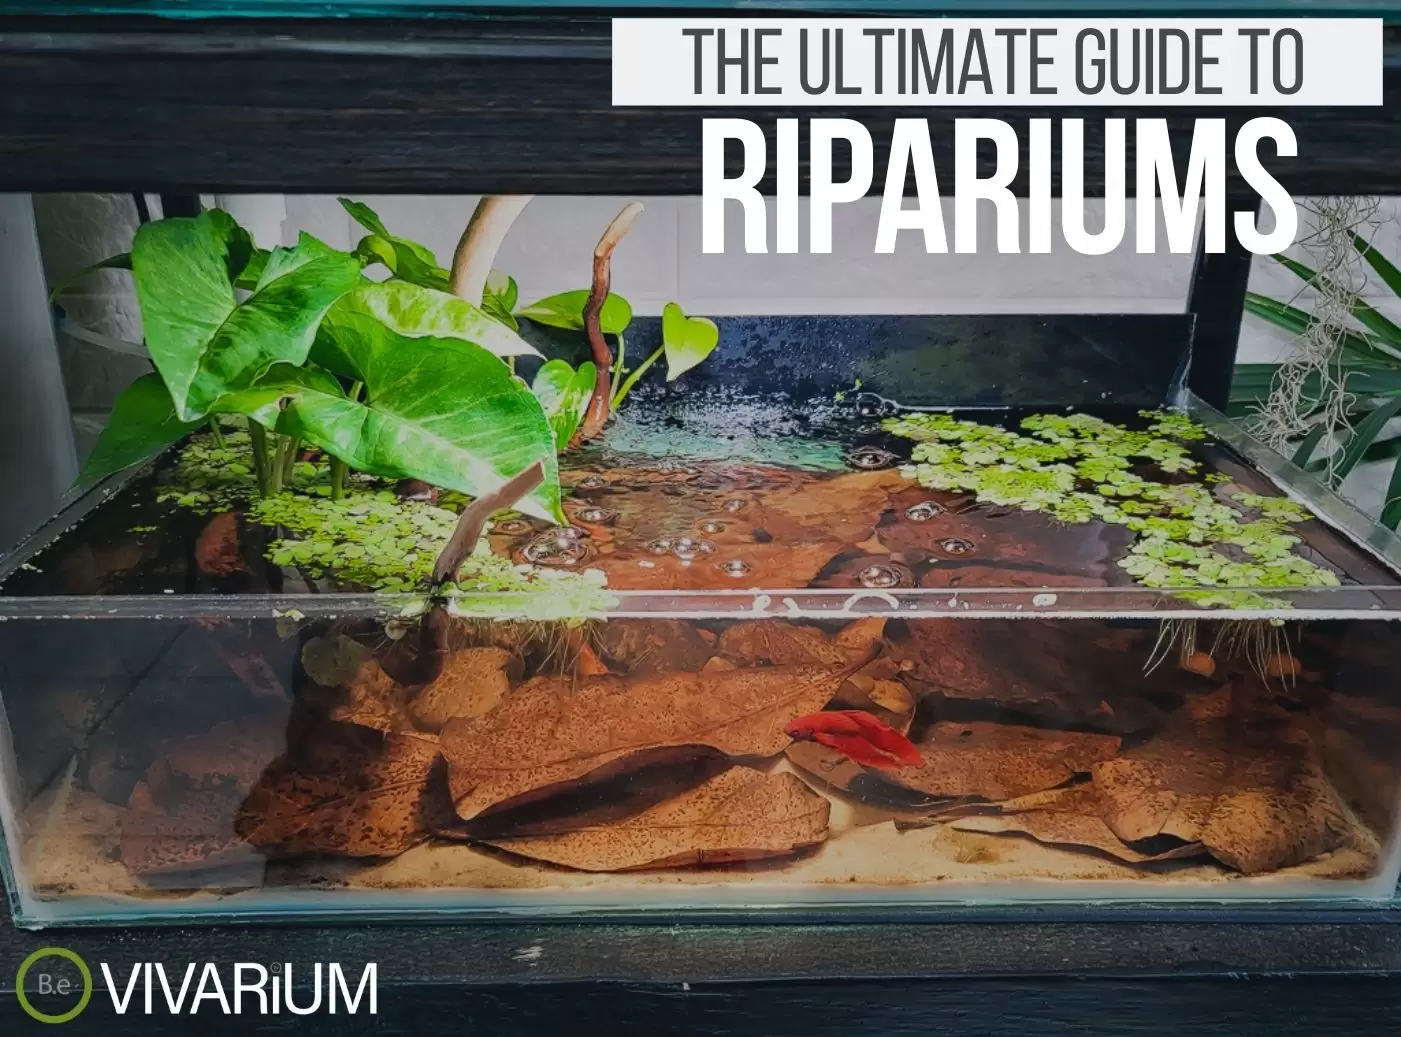 Guppy-Guide: Creating Depth in an AquaScape - Simple Tips